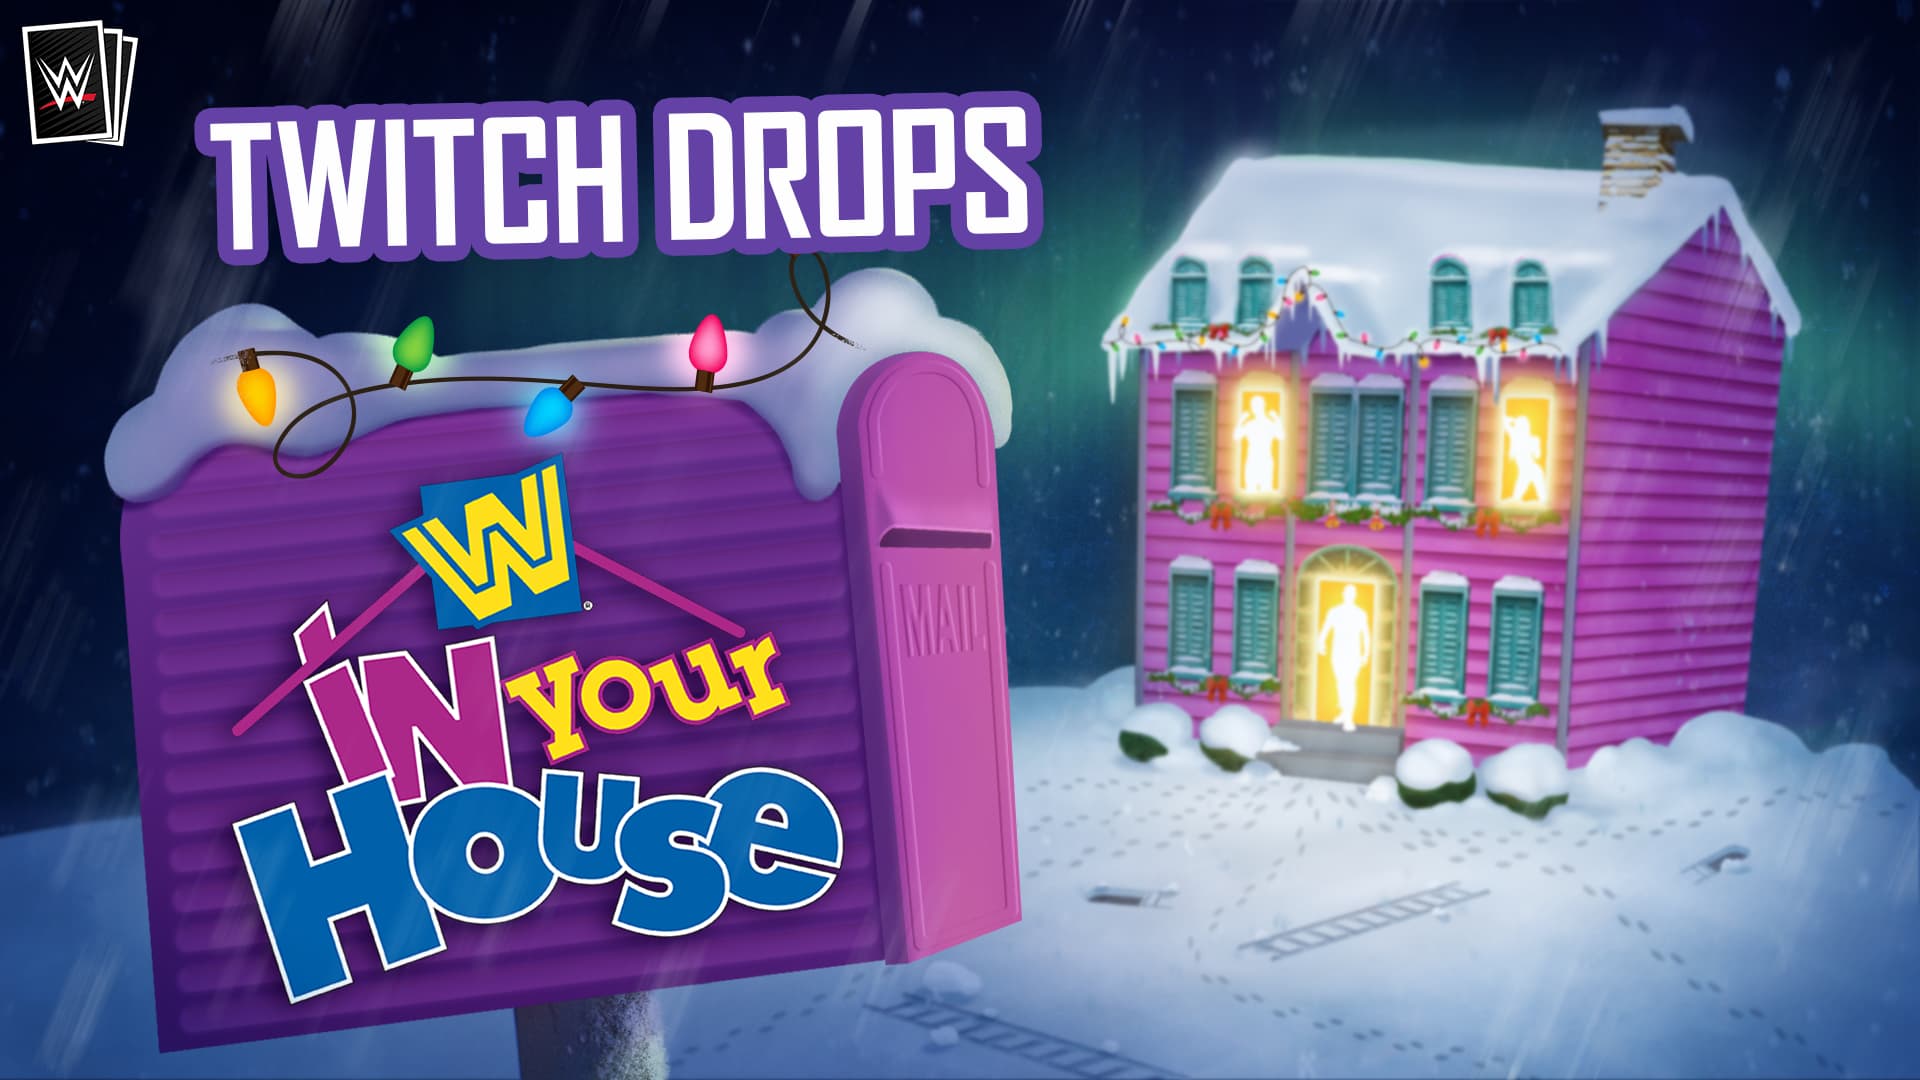 Twitch Drops In Your House Banner 